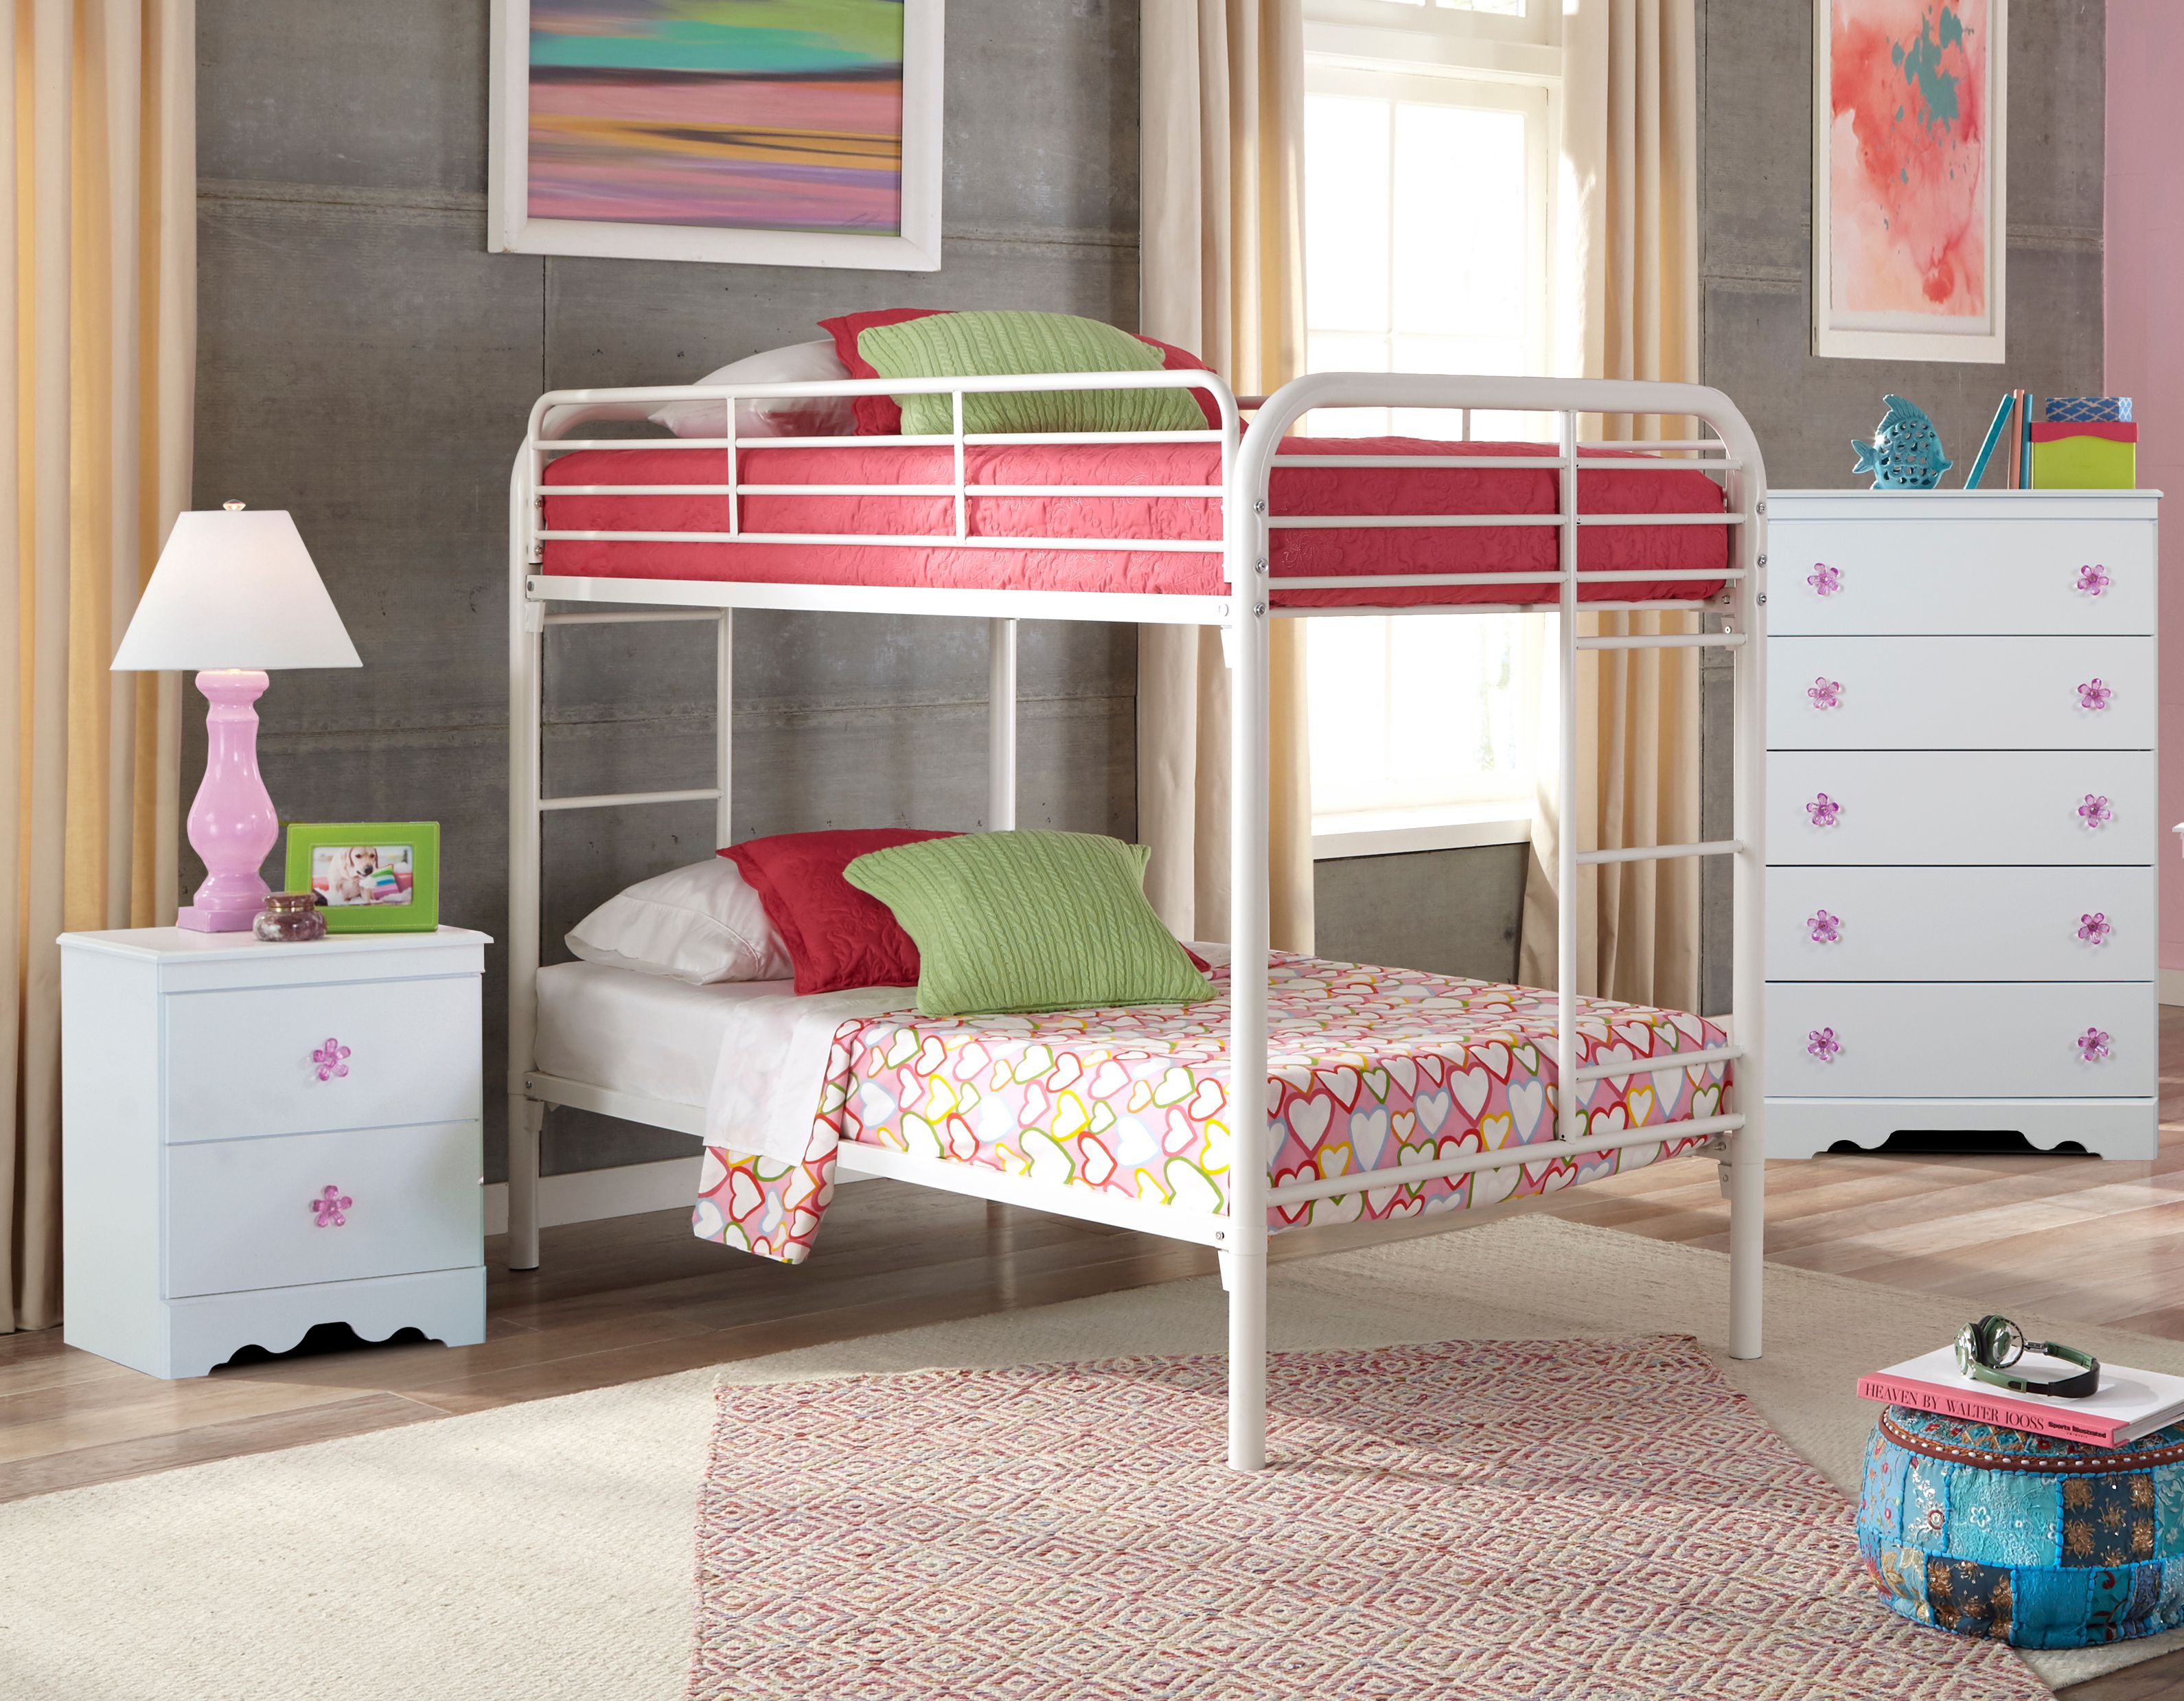 American Furniture Classics Savannah Collection 269K3TT Three Piece White Bedroom set with attractive pink and purple pulls including Twin over Twin Metal Bunkbed, Night Stand, and Five Drawer Chest - image 1 of 9